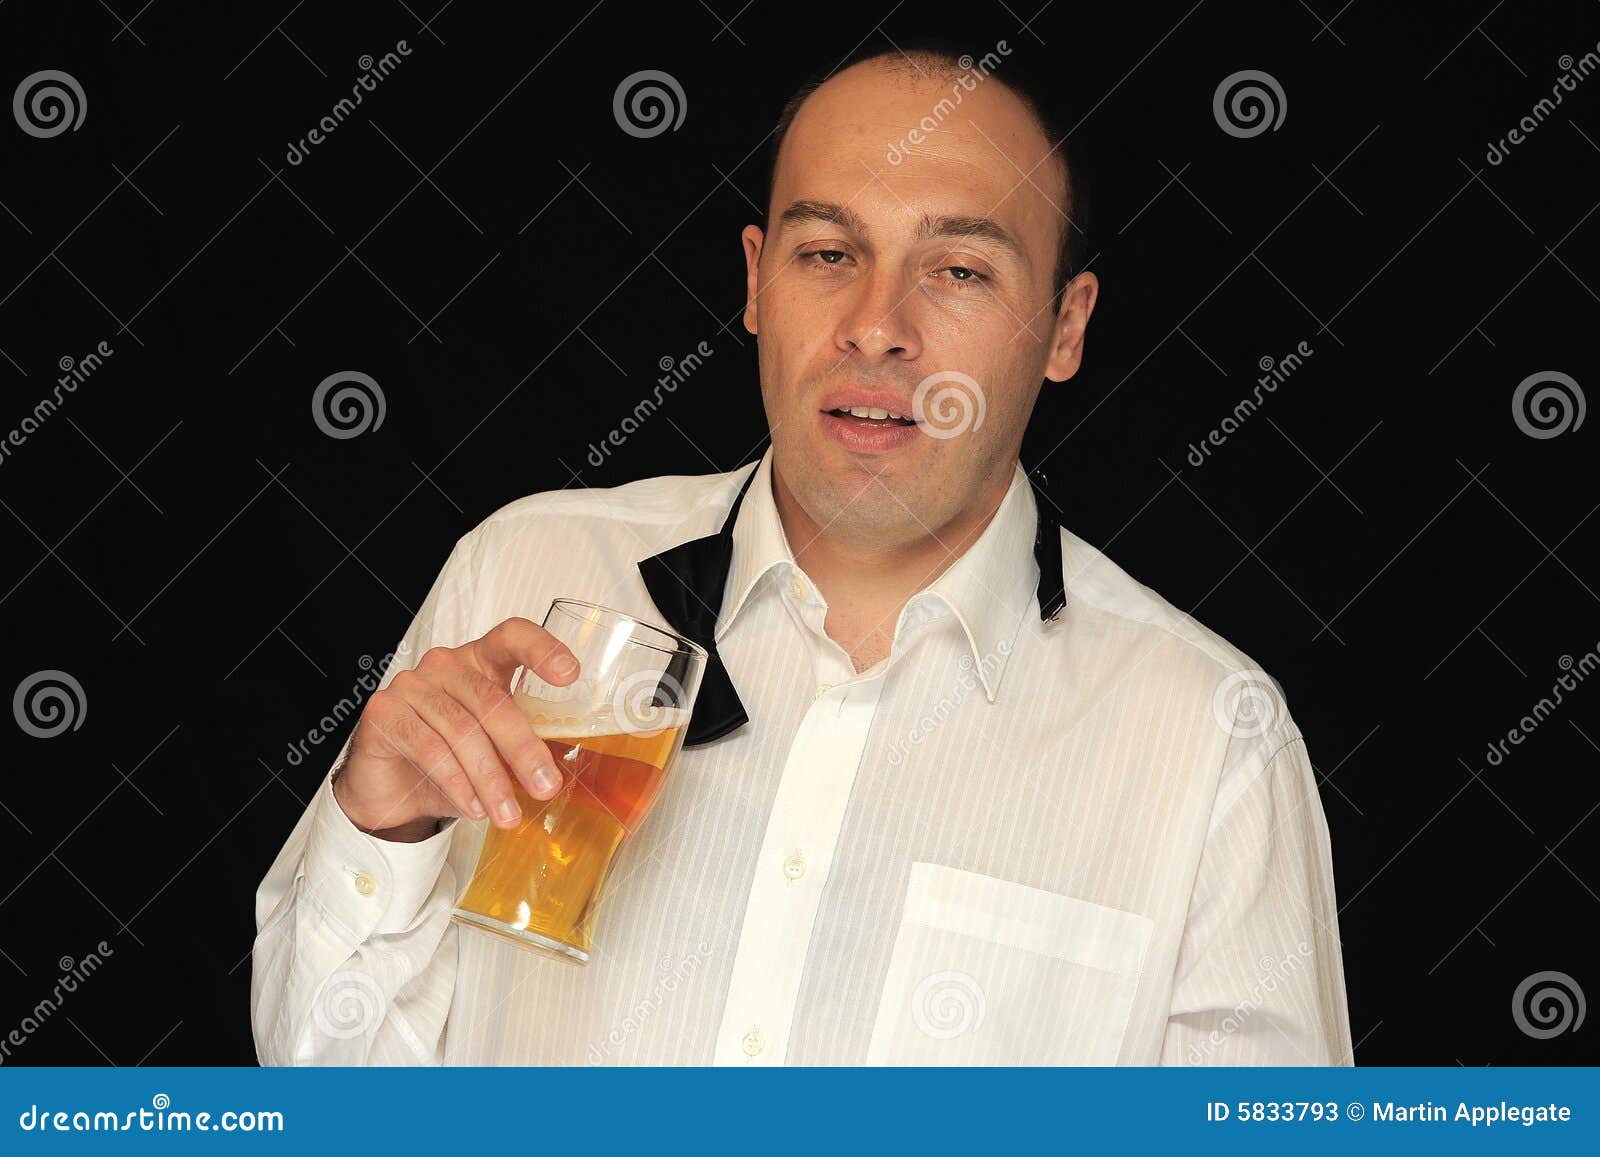 Drunk Man With Beverage Stock Photos - Image: 5833793